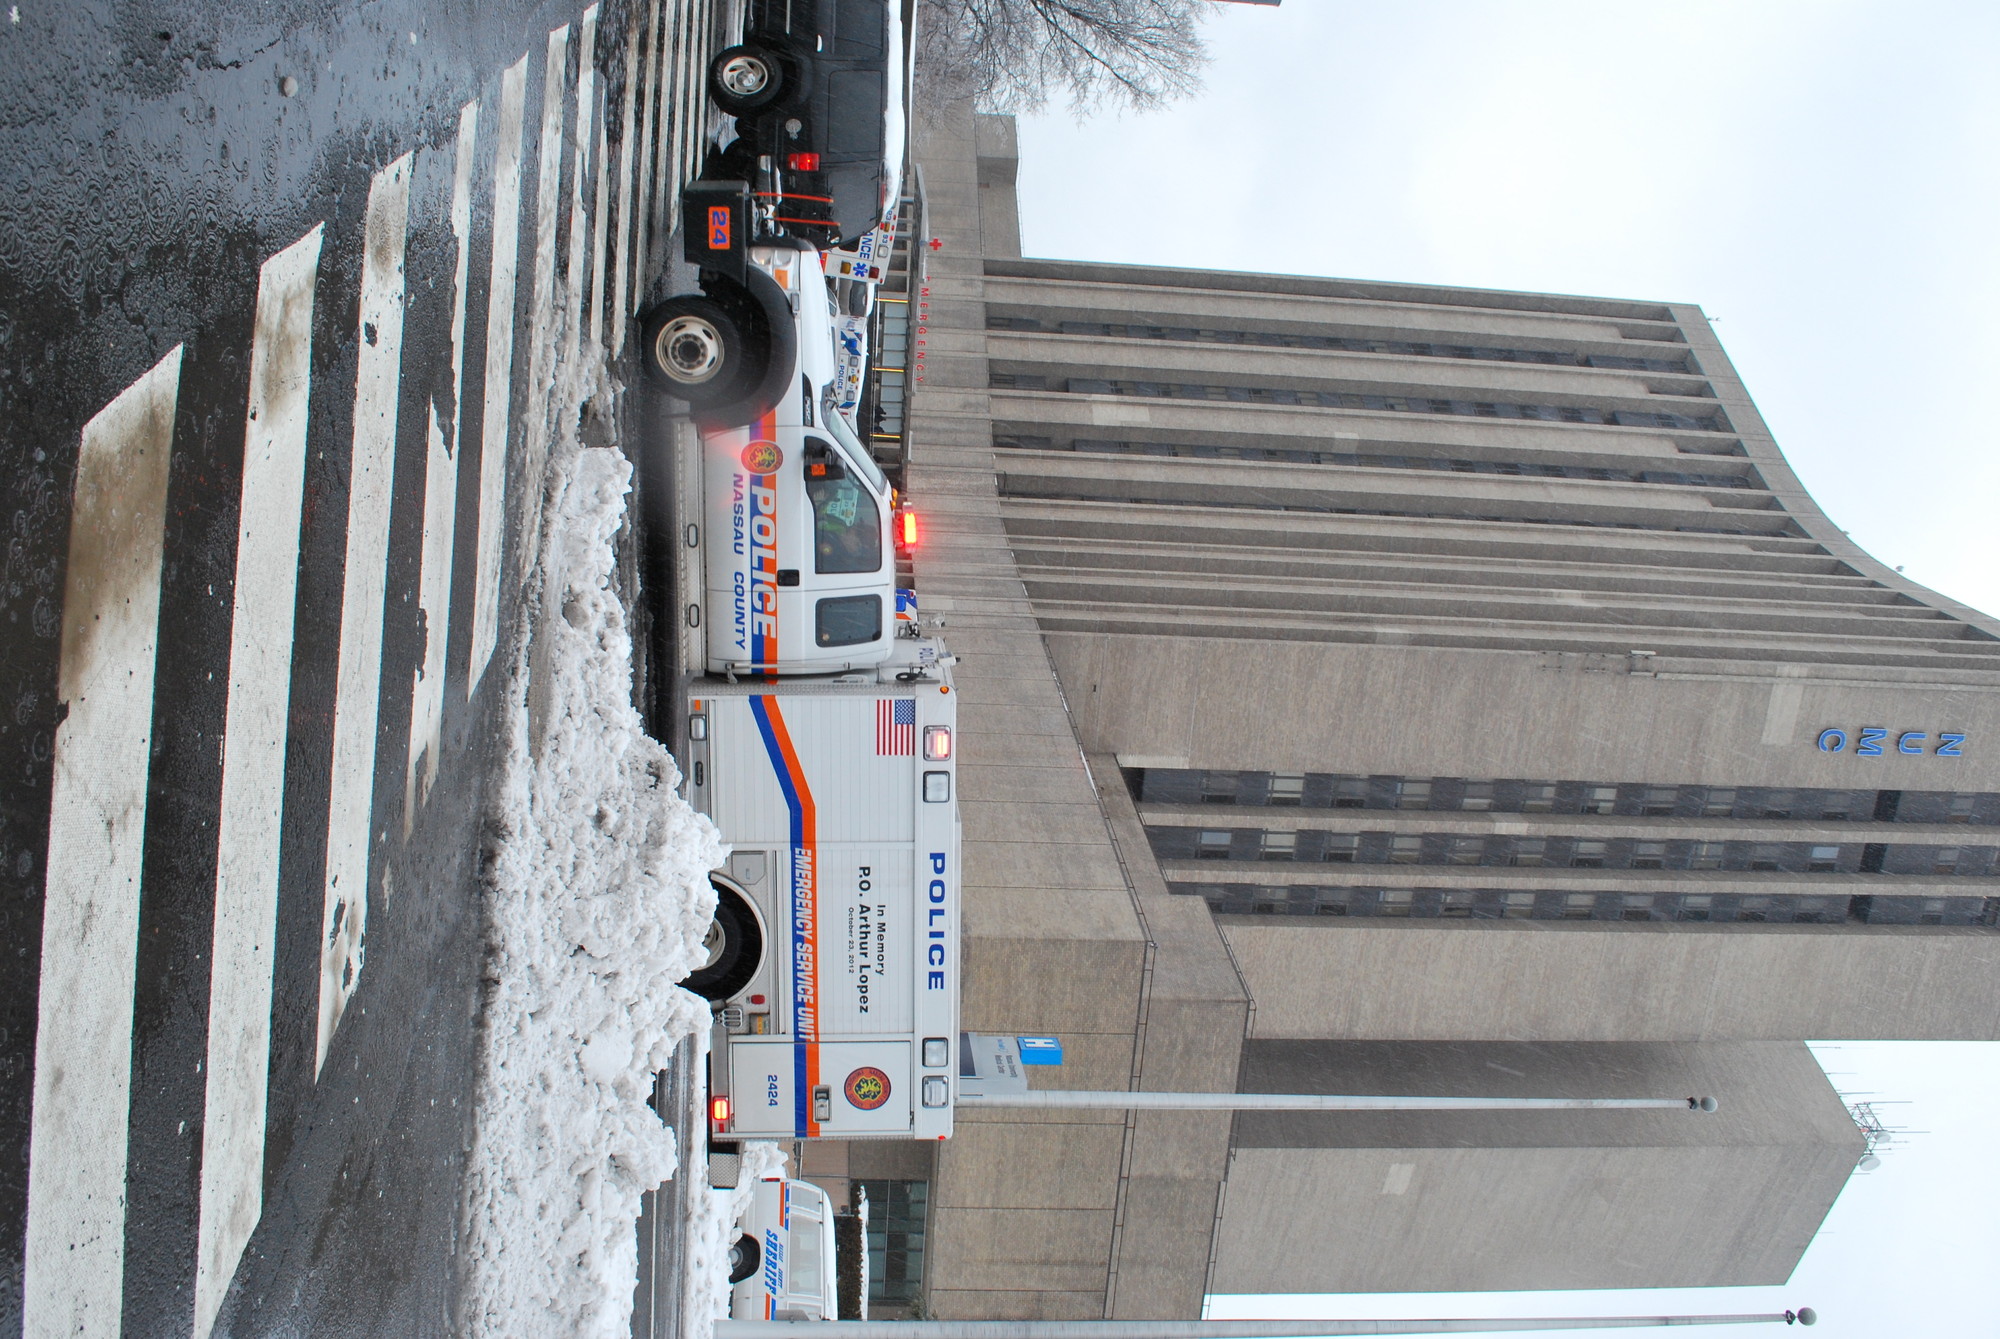 The NUMC emergency room entrance was flooded with police on Wednesday morning.